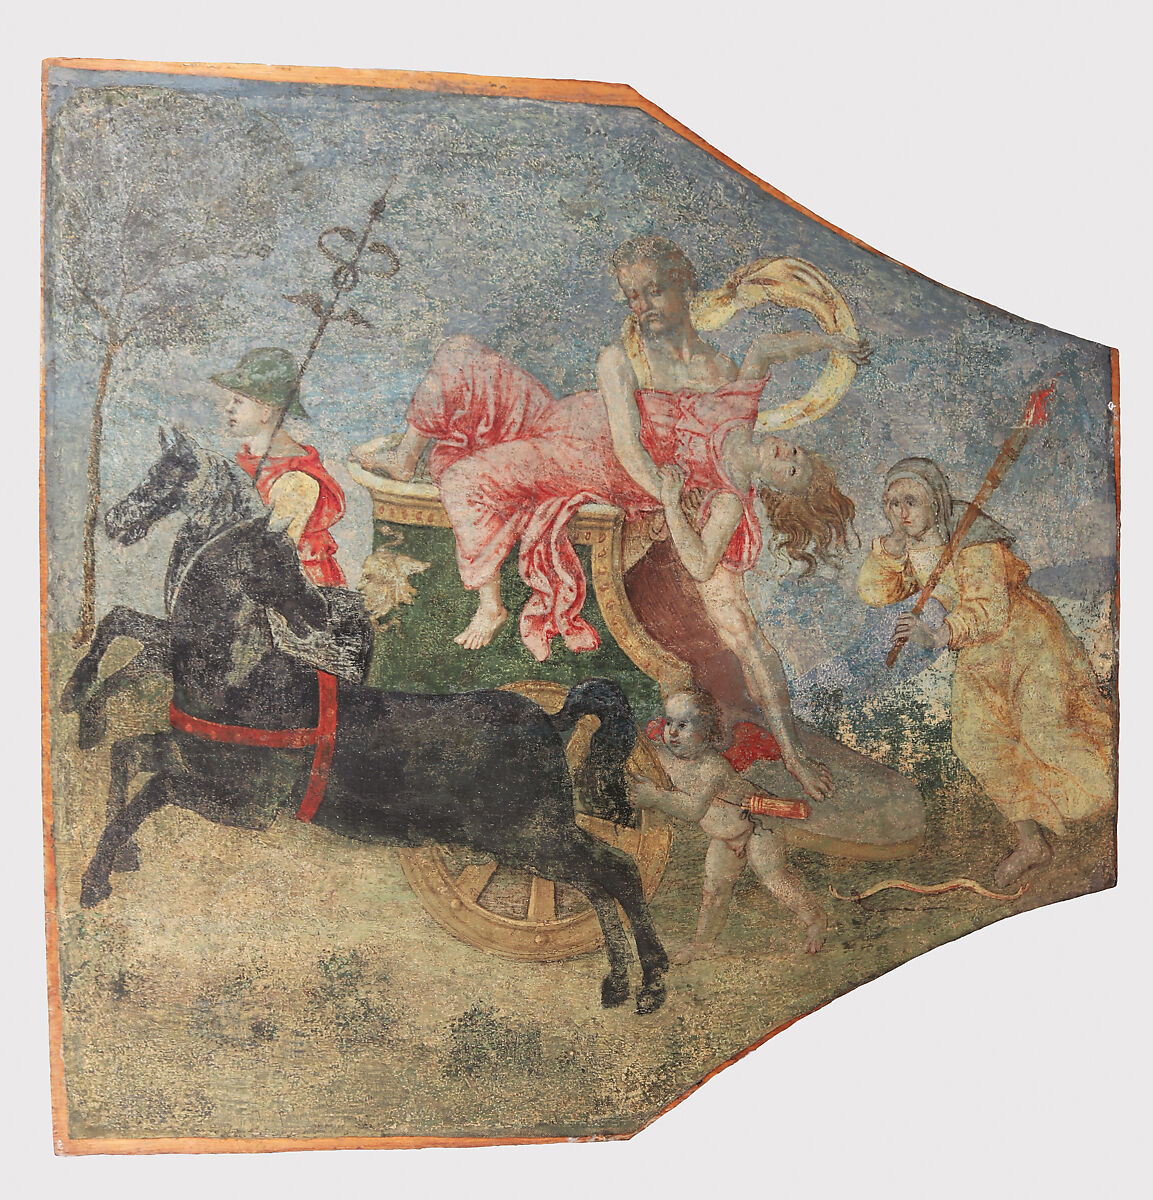 Pinturicchio, Rape of Proserpine, from the ceiling of the Magnifico Palace (c. 1509; fresco transported to canvas and transferred to panel, 78.7 x 80.6 cm; New York, Metropolitan Museum)